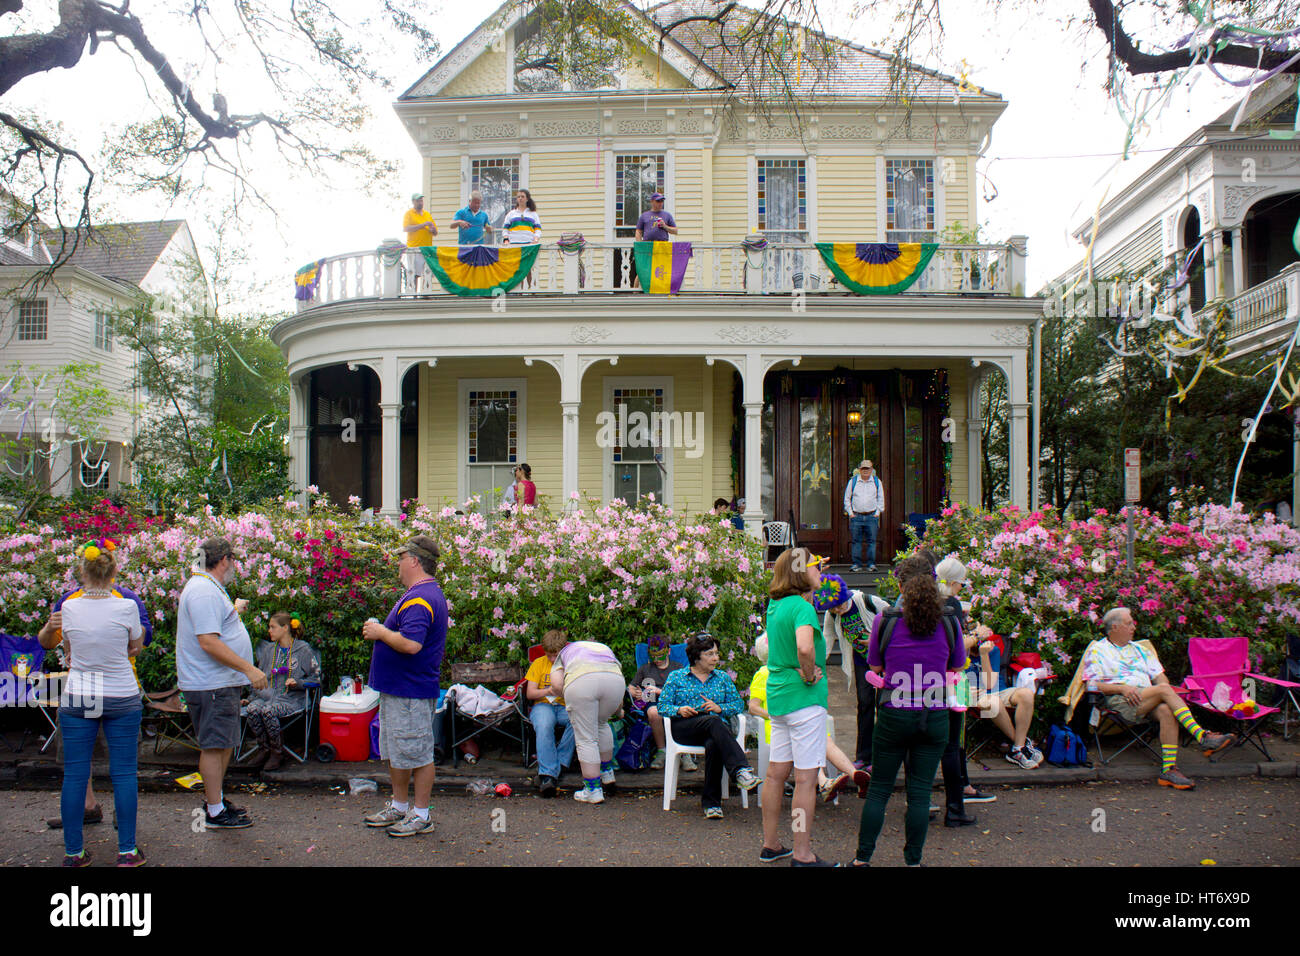 A Mardi Gras crowd gathers on St. Charles Ave waiting for a parade.  New Orleans, LA. Stock Photo